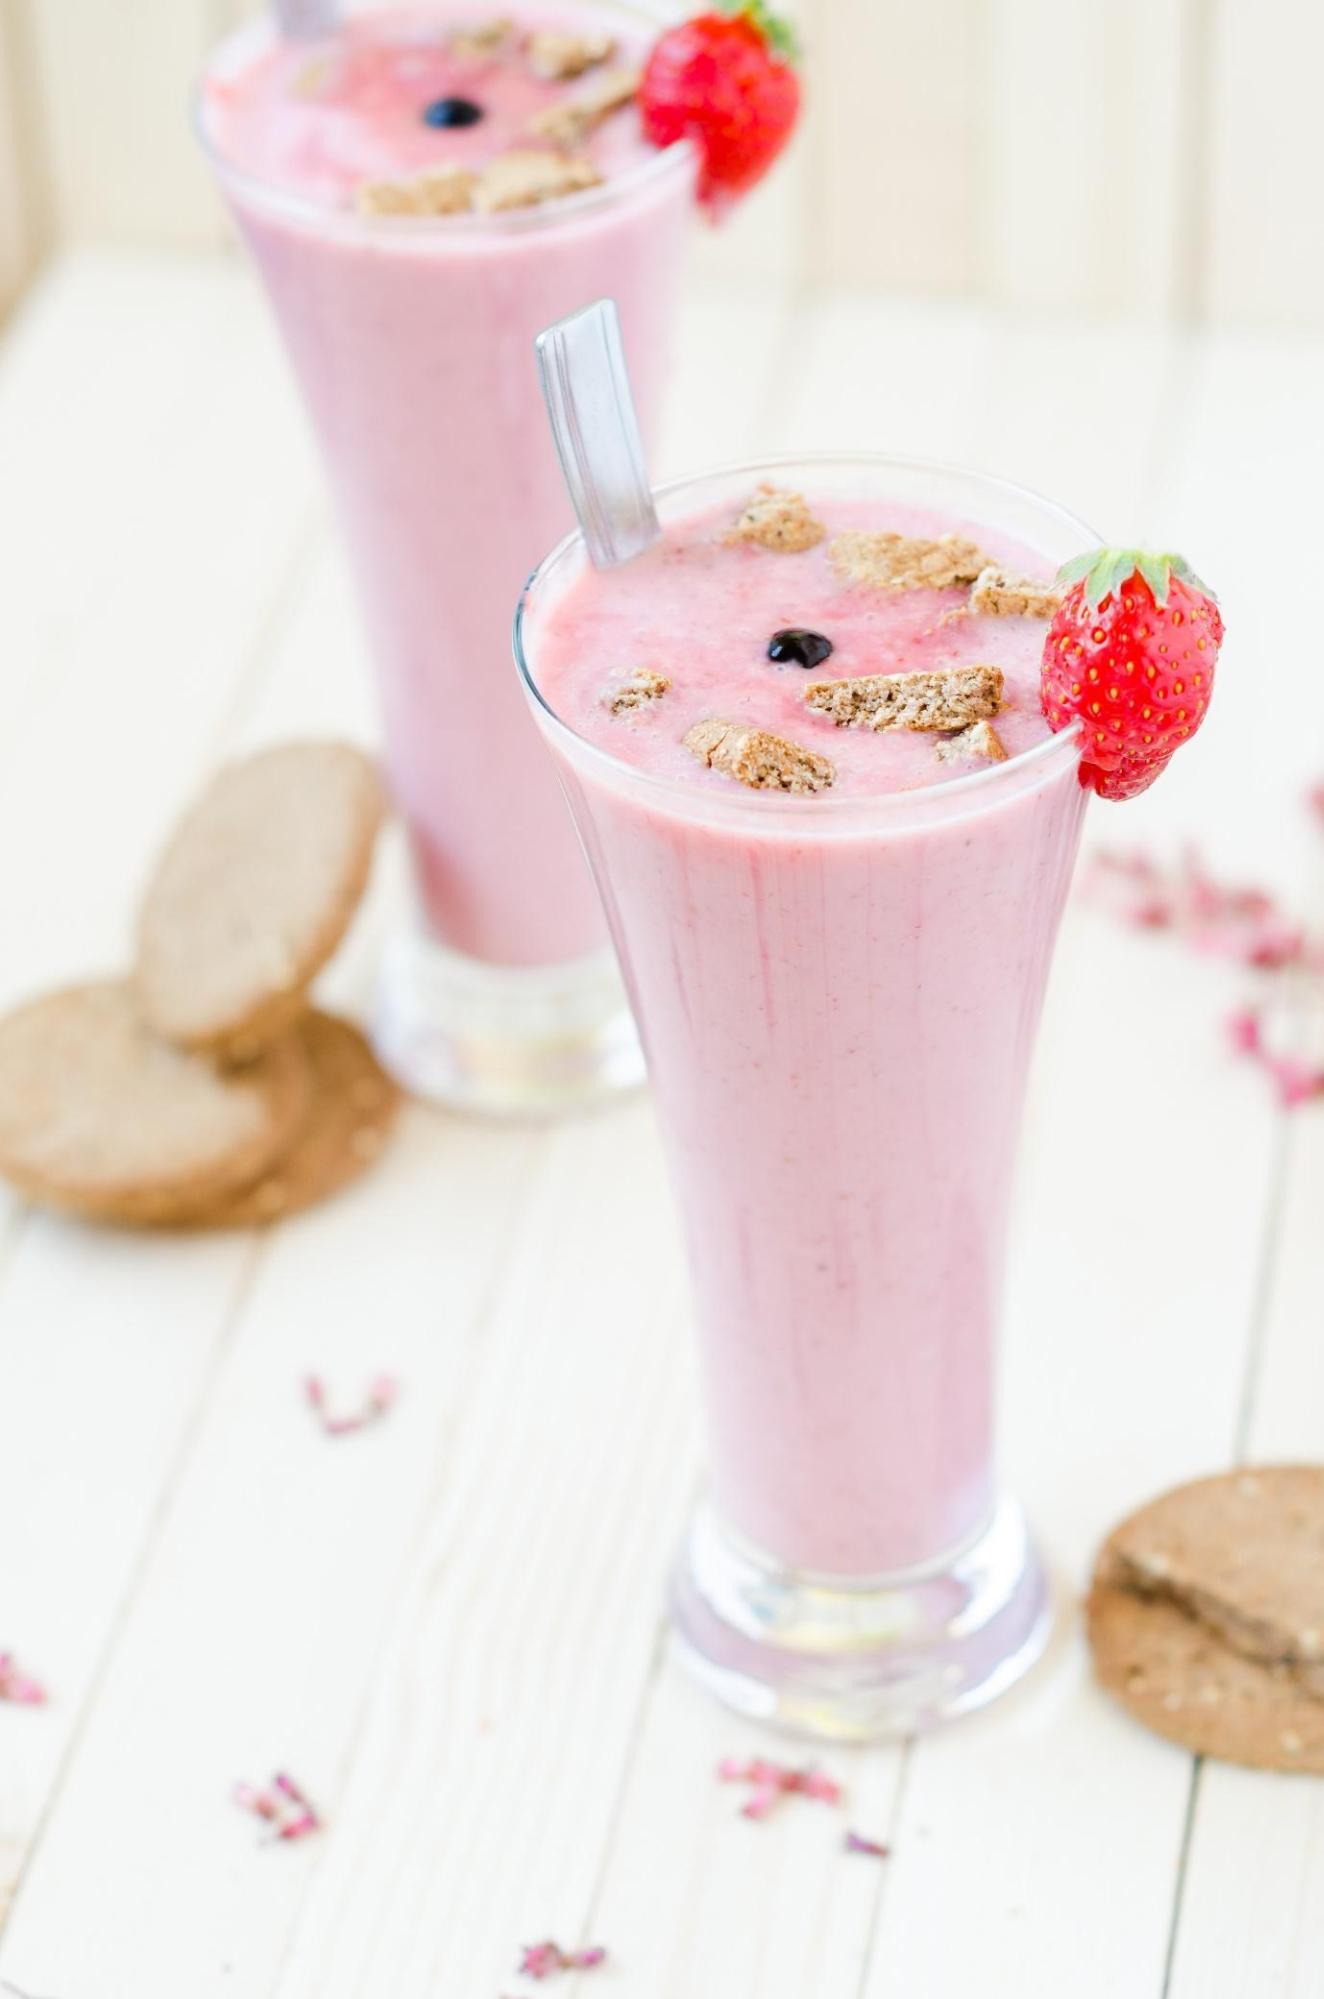 Fruits that you Can Add to your Keto Strawberry Shake